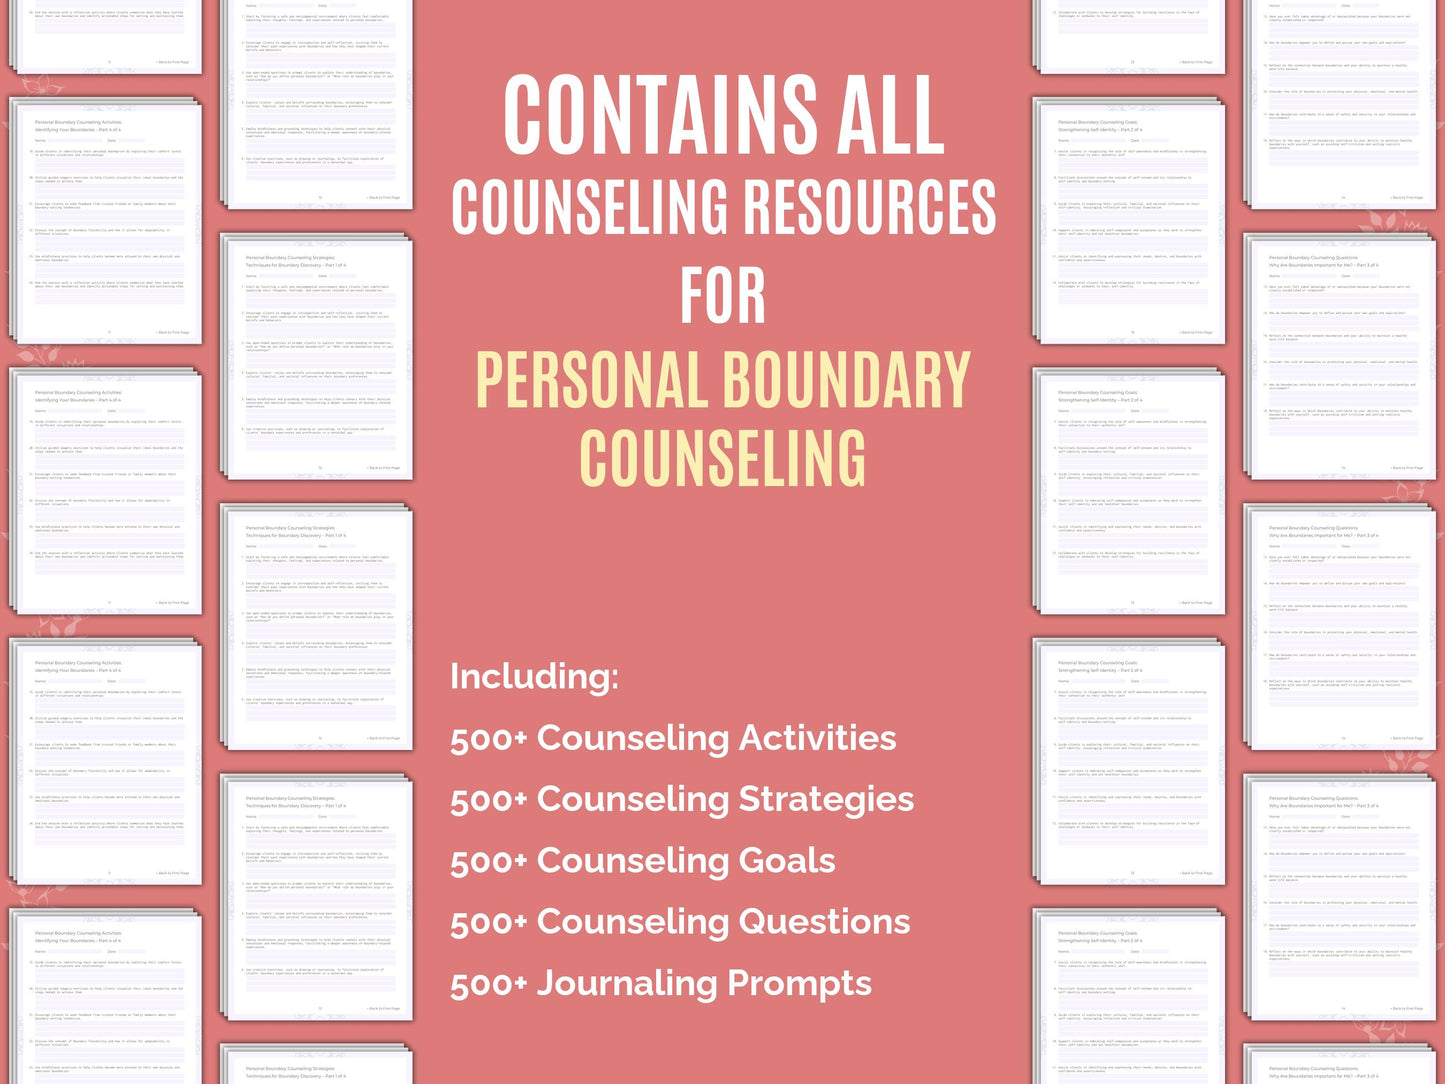 Personal Tool, Personal Template, Mental Health, Personal Therapy, Counselor, Personal Bundle, Boundary, Personal Idea, Therapist, Personal Counseling, Personal Worksheet, Personal Resource, Personal Workbook